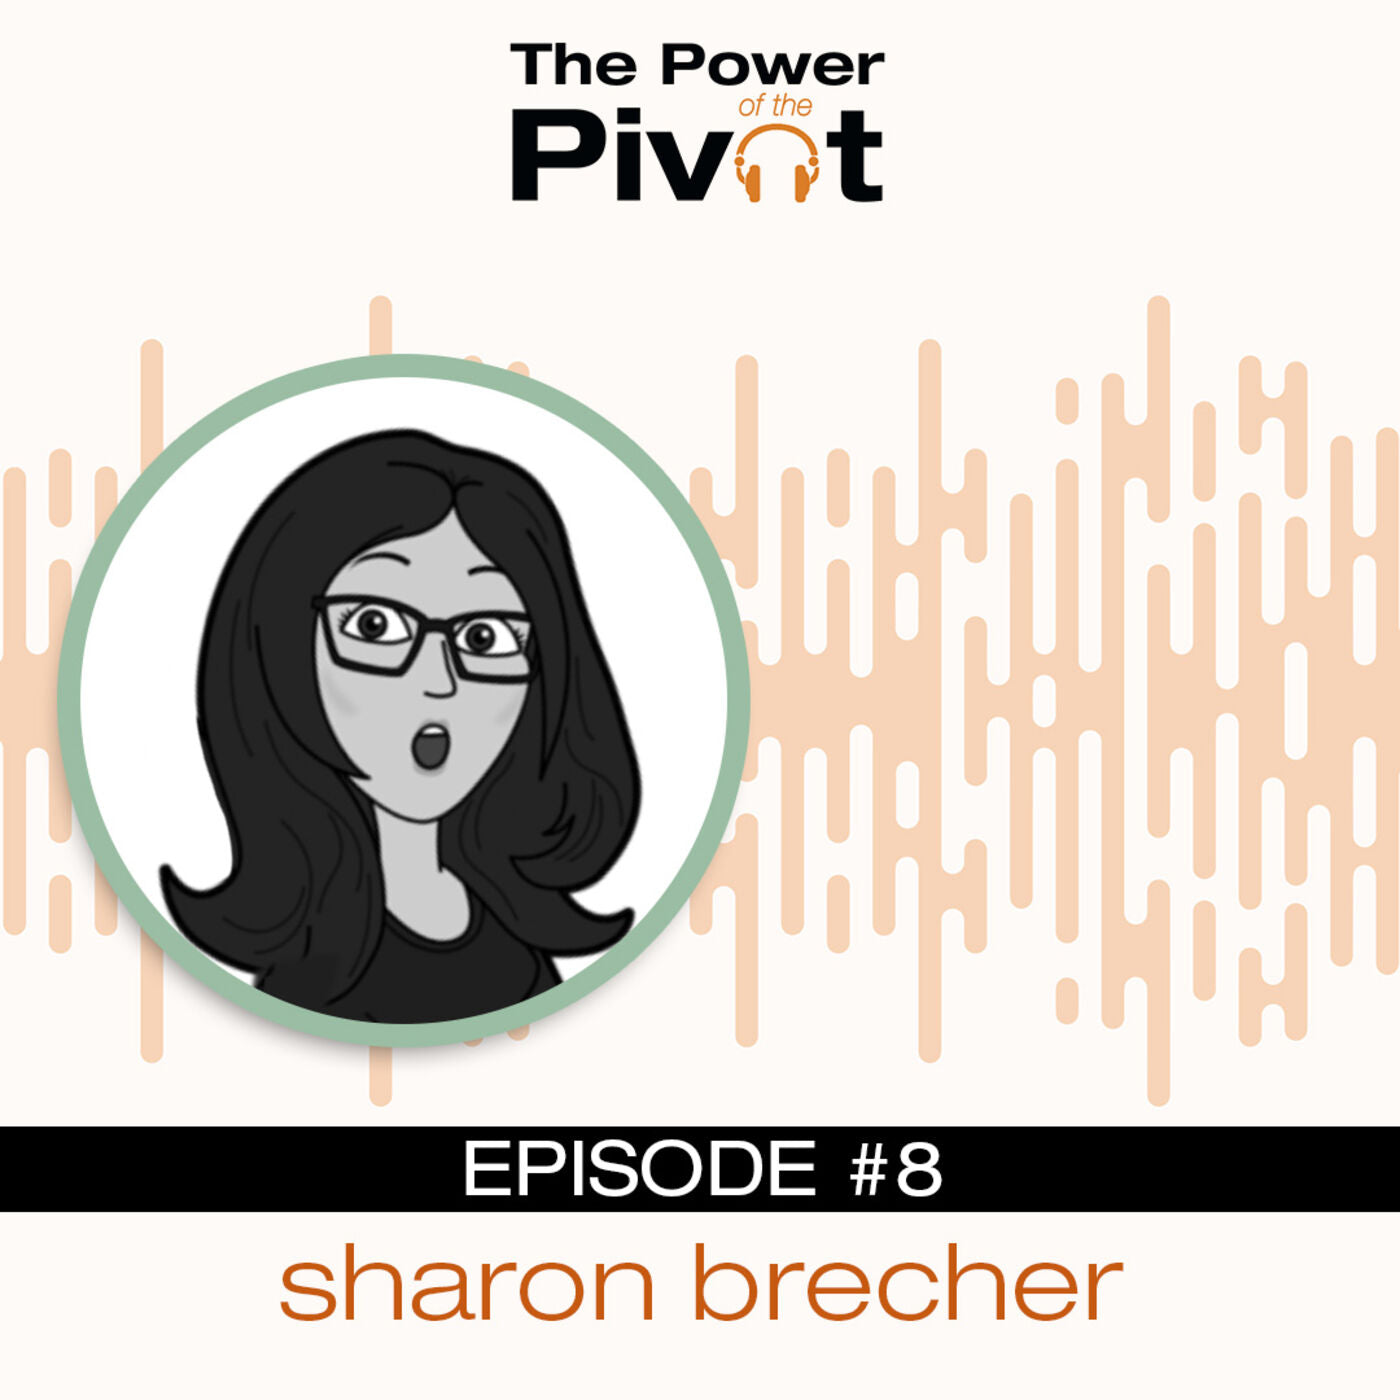 Power of the Pivot Podcast: Illustrating The Life of a Miserable Mom with Sharon Brecher